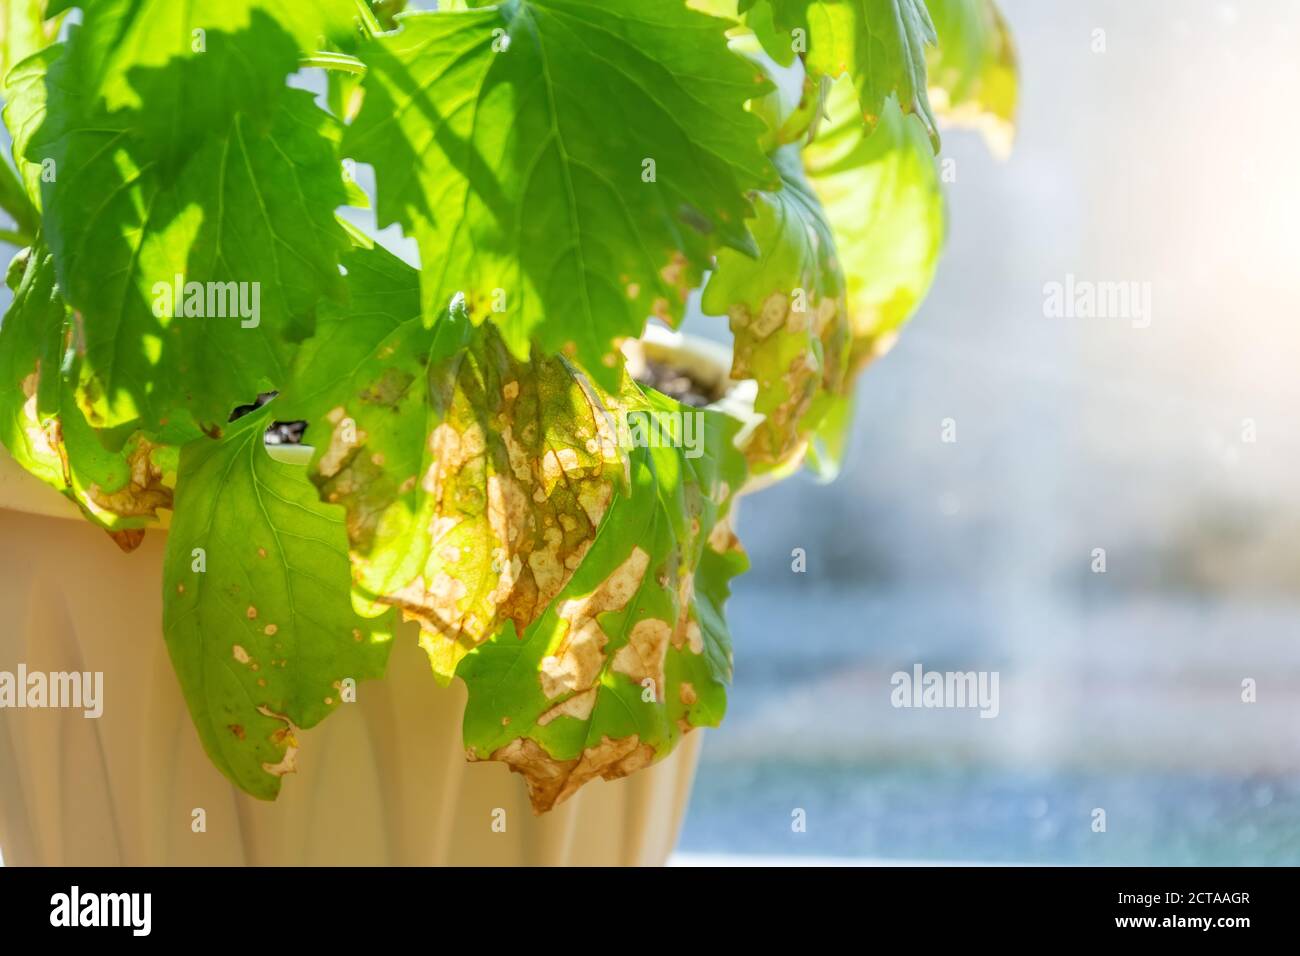 Leaves of an ornamental flowering plant in a pot with an infectious disease, dried leaves in spots Stock Photo